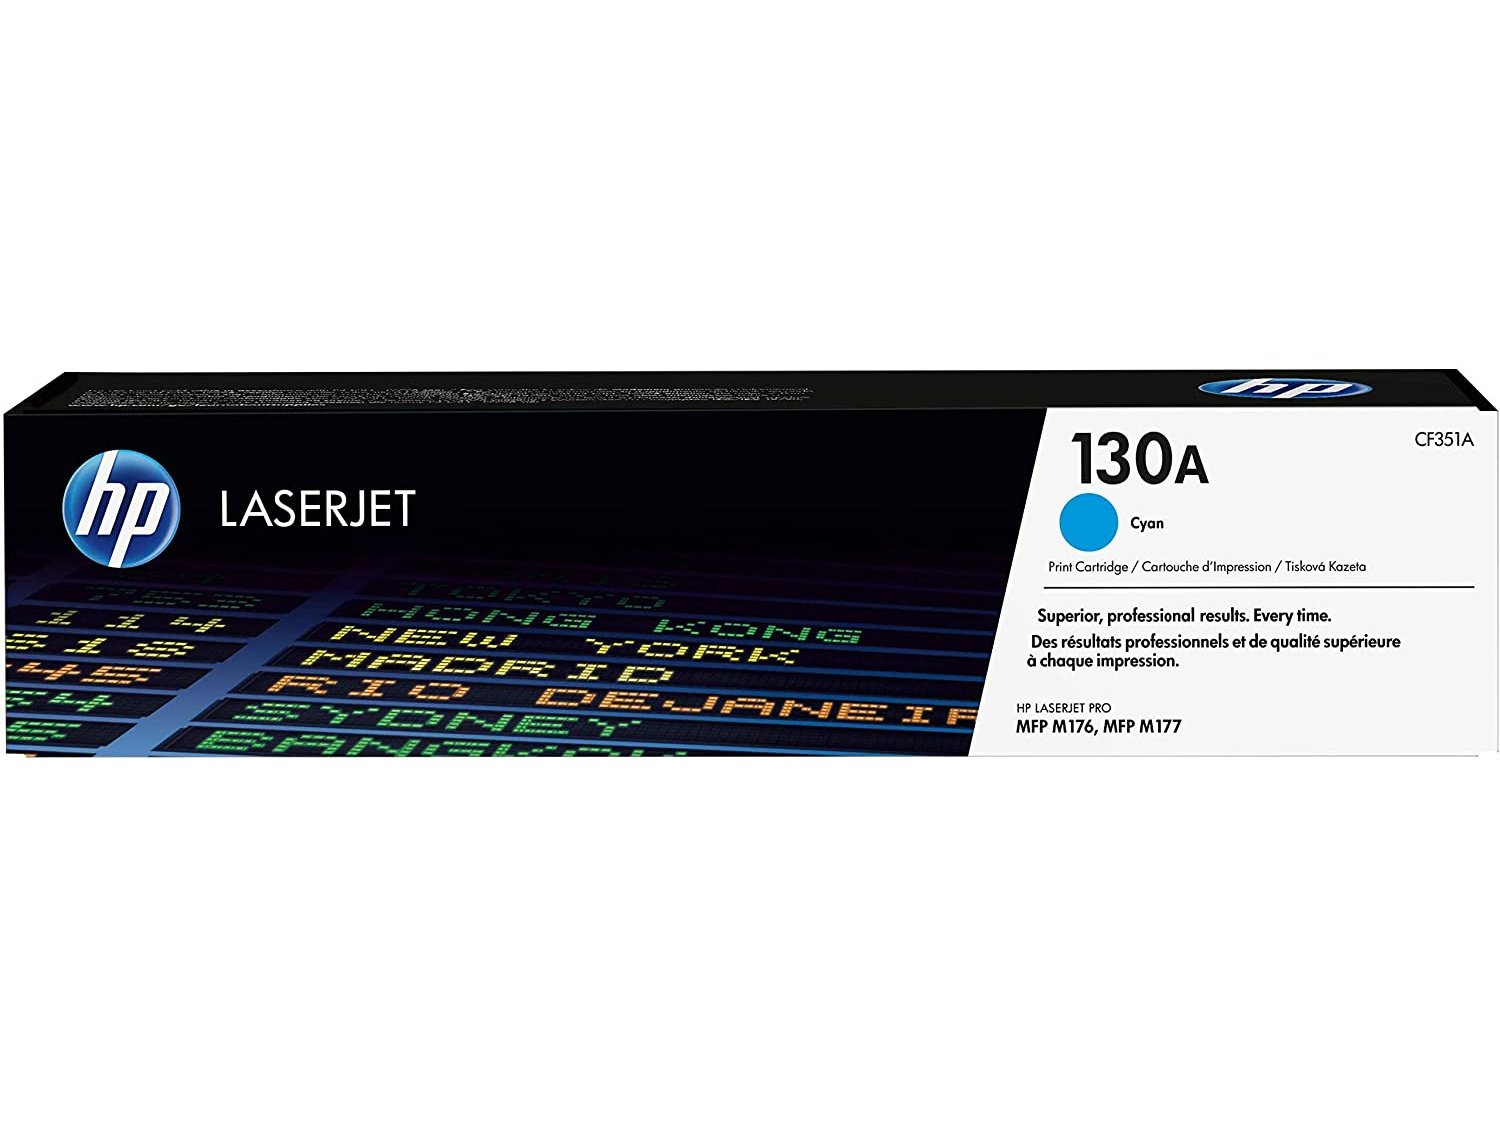 ICU Compatible/ OEM Get HP ICUCF351A Yields 1000 Pages Compatible 130A Cyan CF351A Laser Toner Cartridge for Hewlett Packard Printers